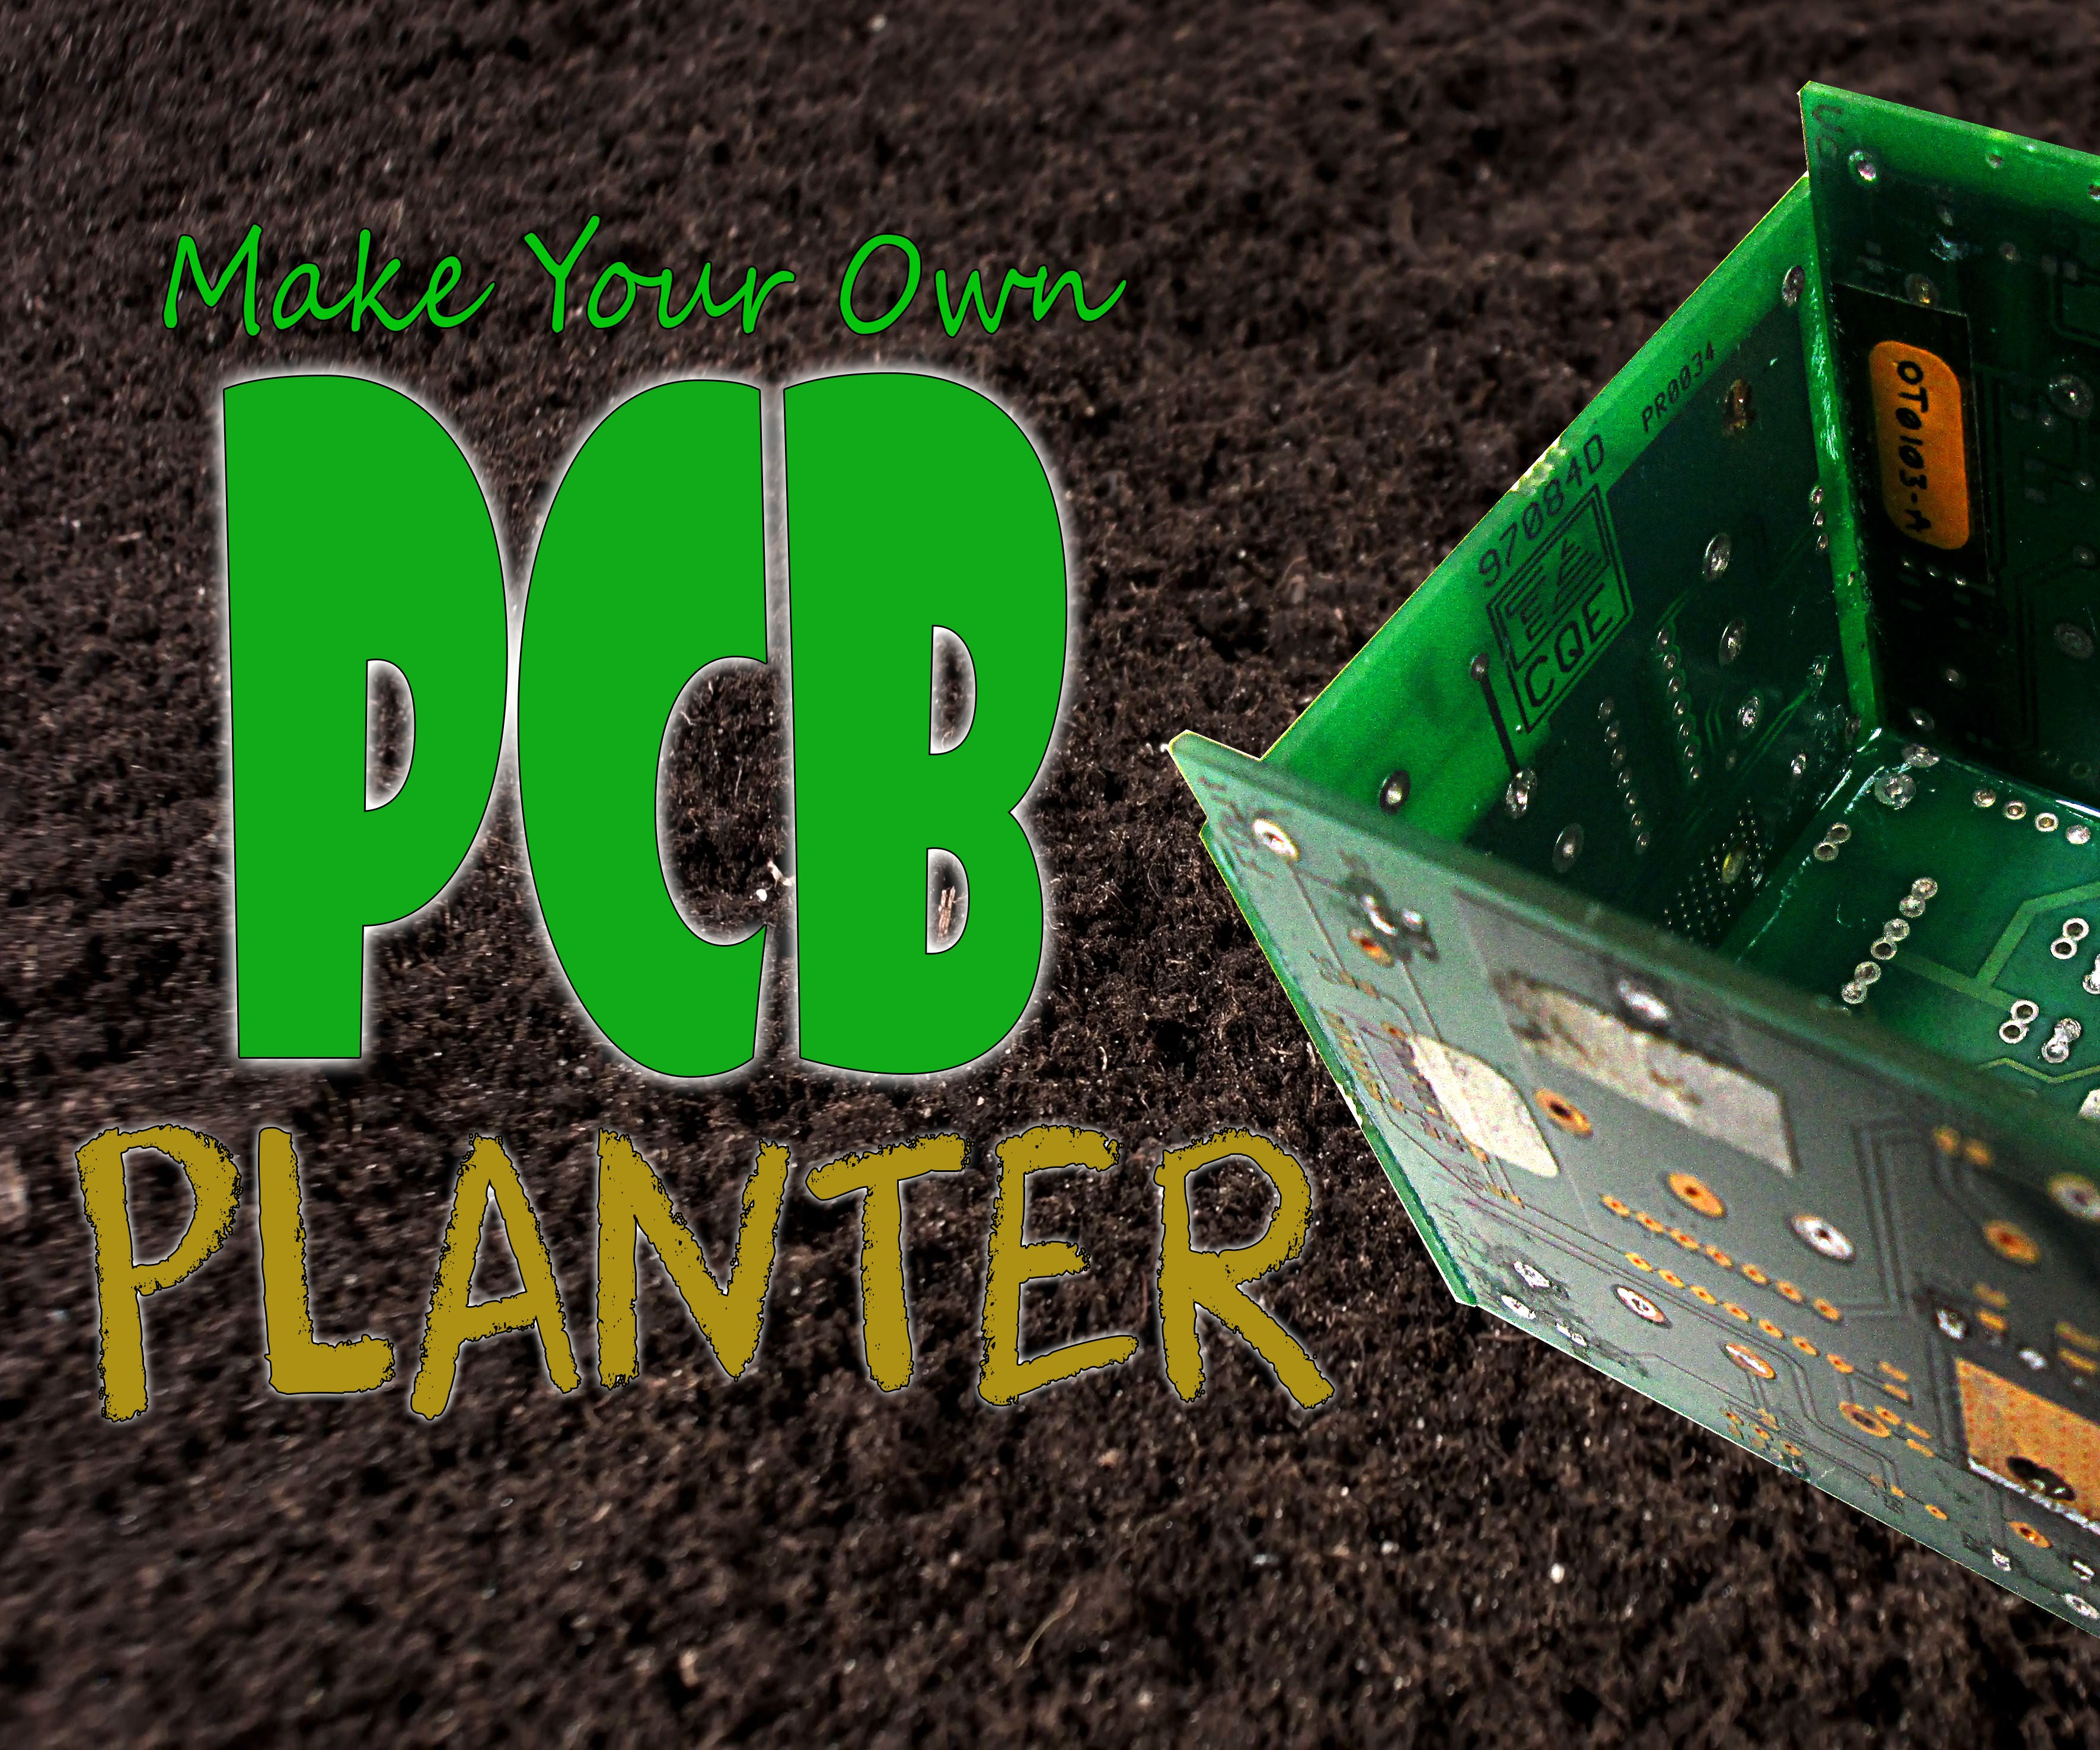 Make Your Own PCB PLANTER